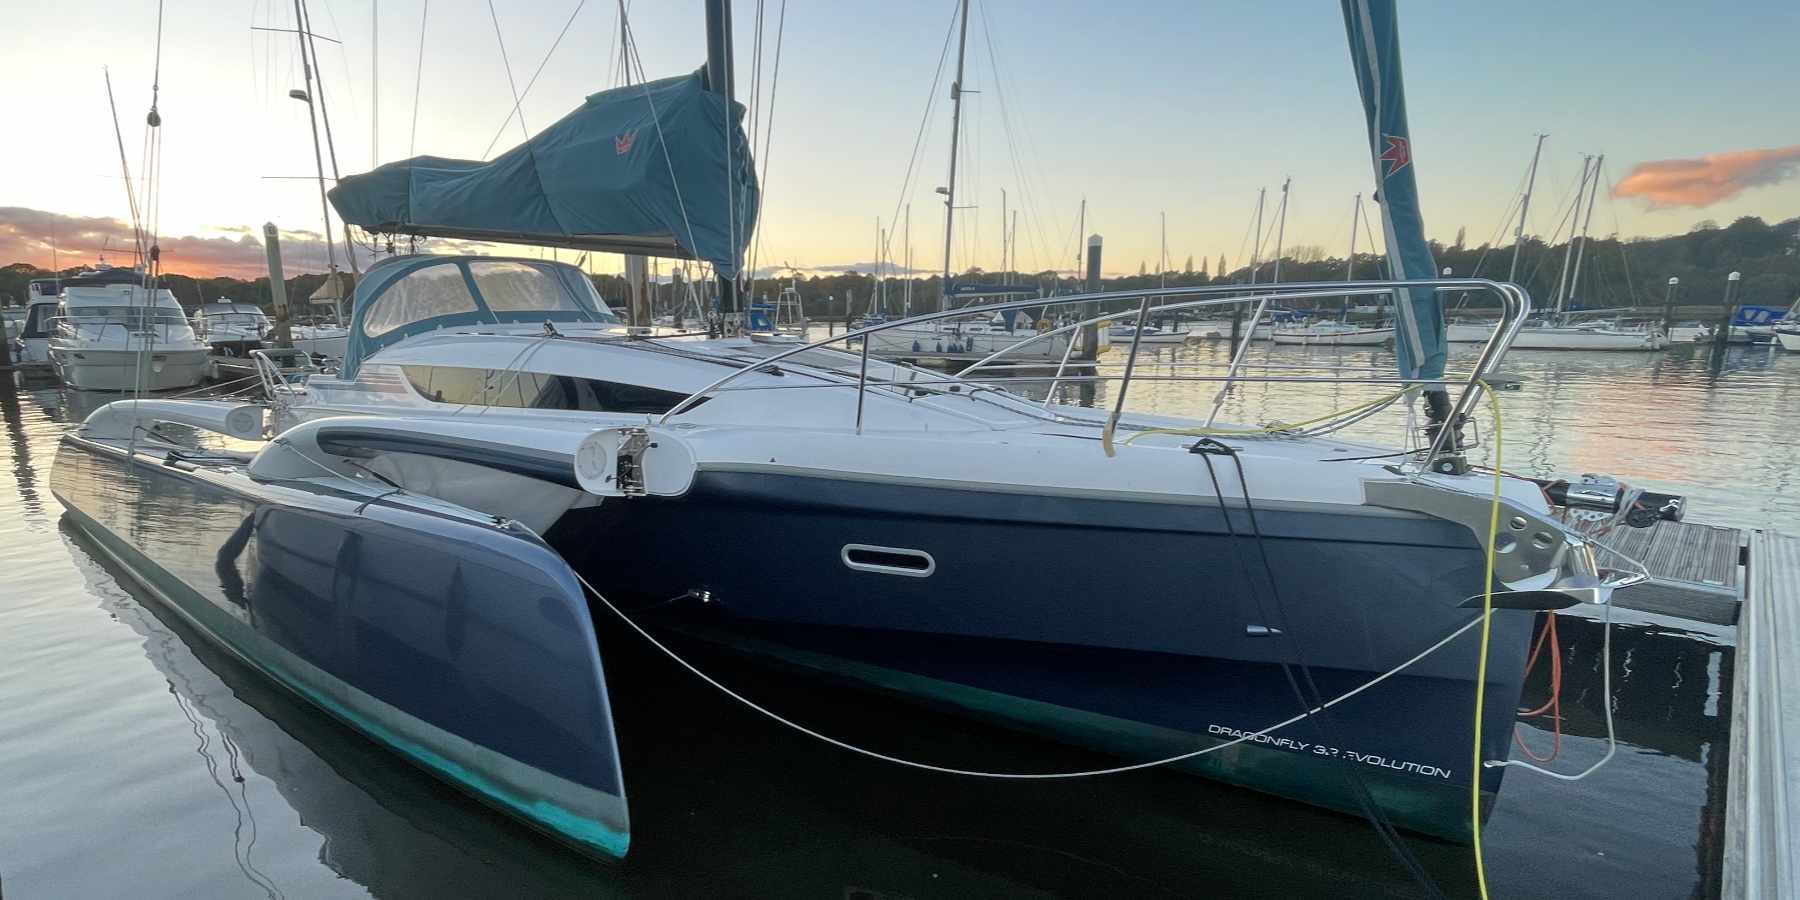 Dragonfly 32 for sale